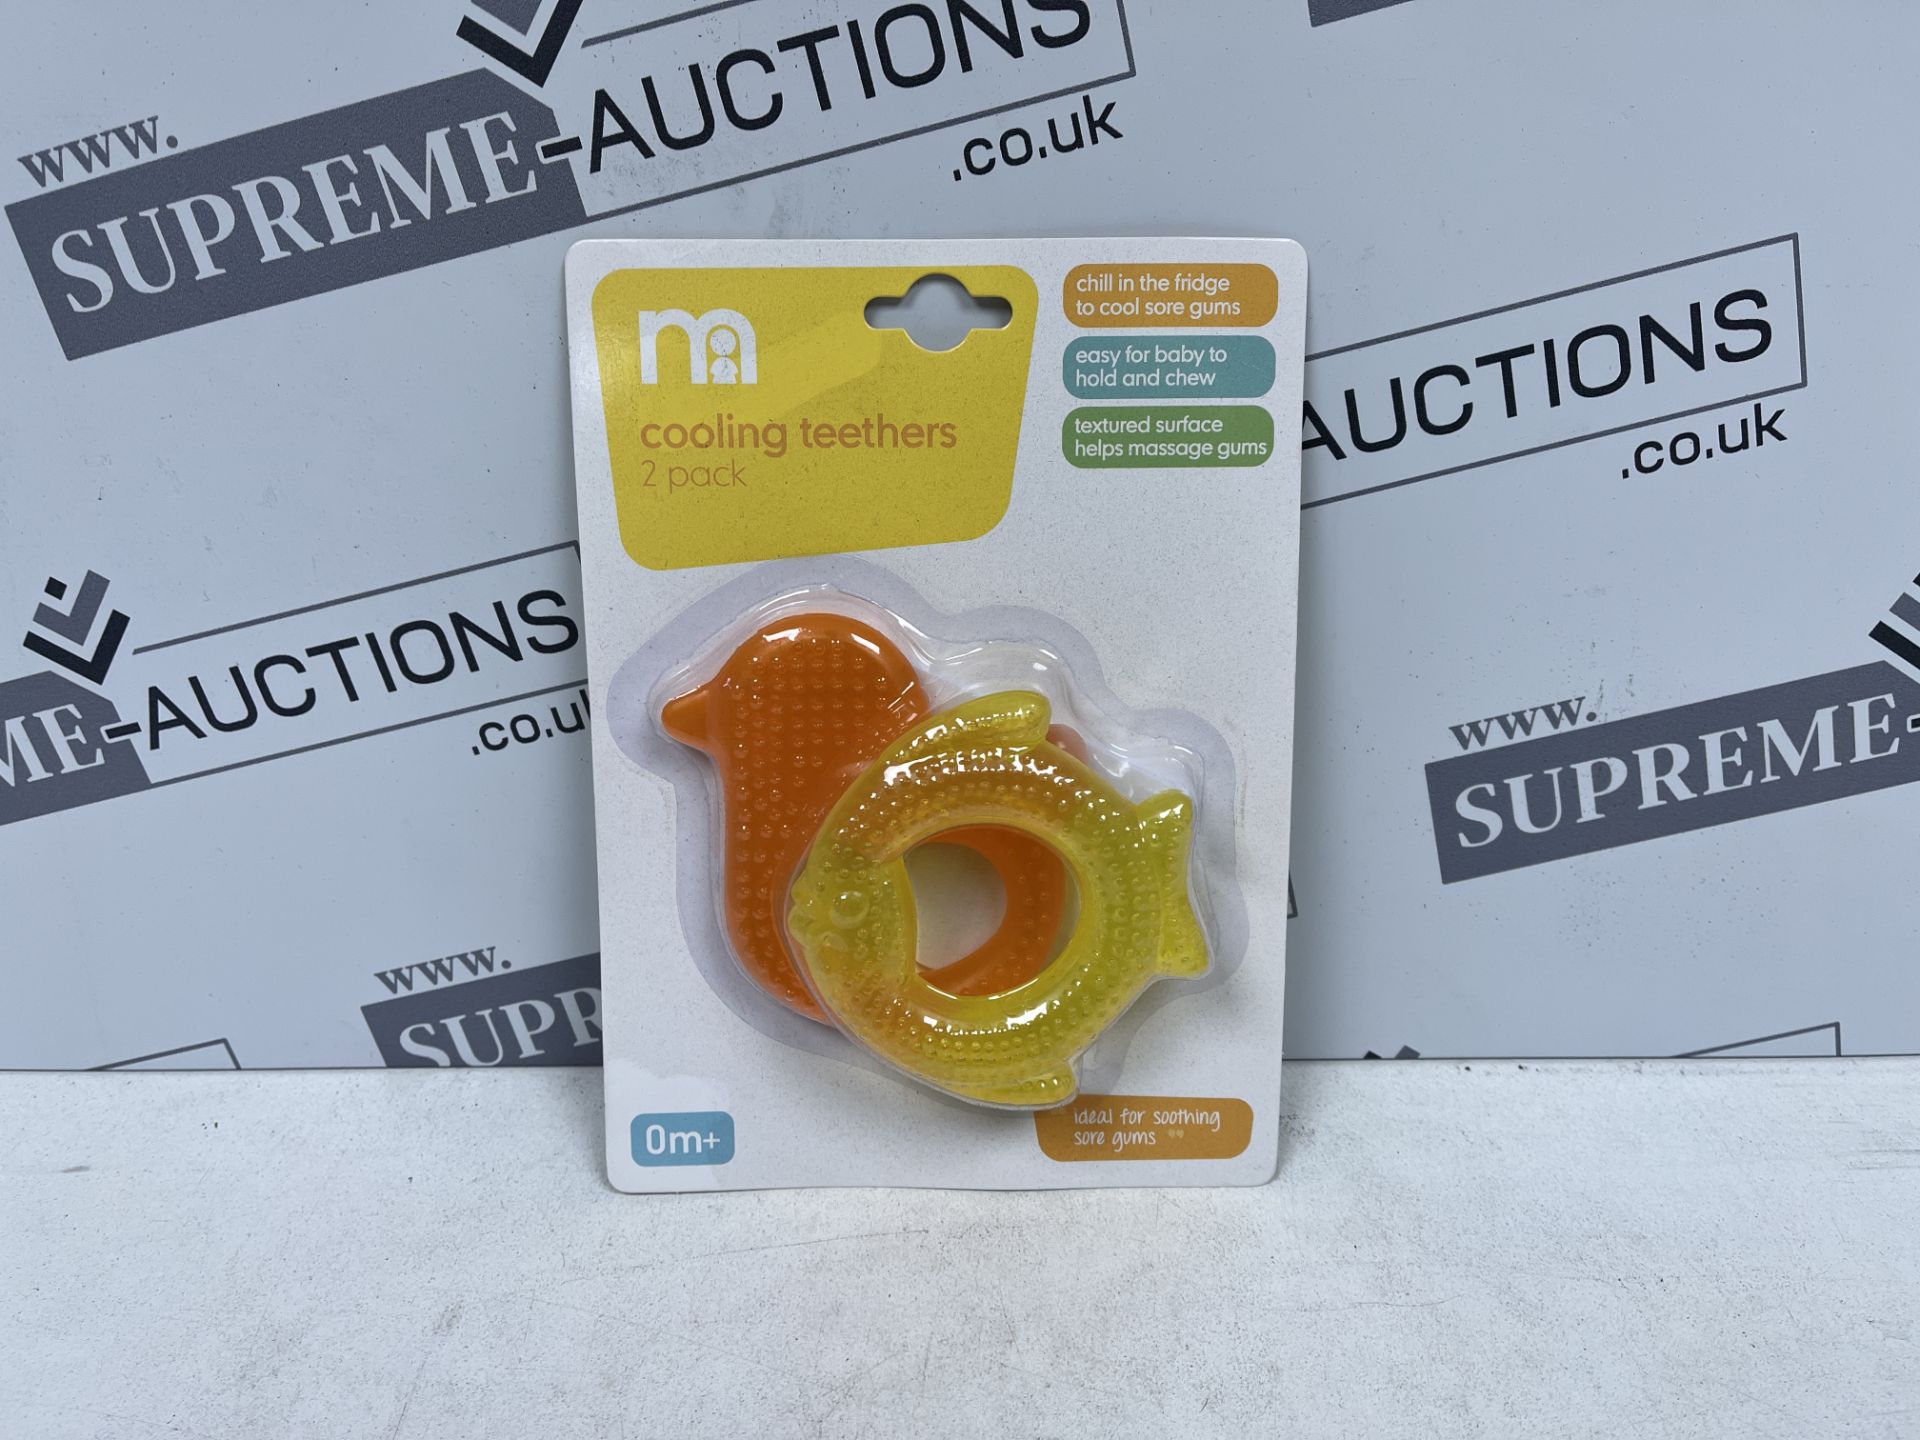 24 X BRAND NEW PACKS OF 2 DUCK AND FISH TEETHERS MOTHERCARE R4-5